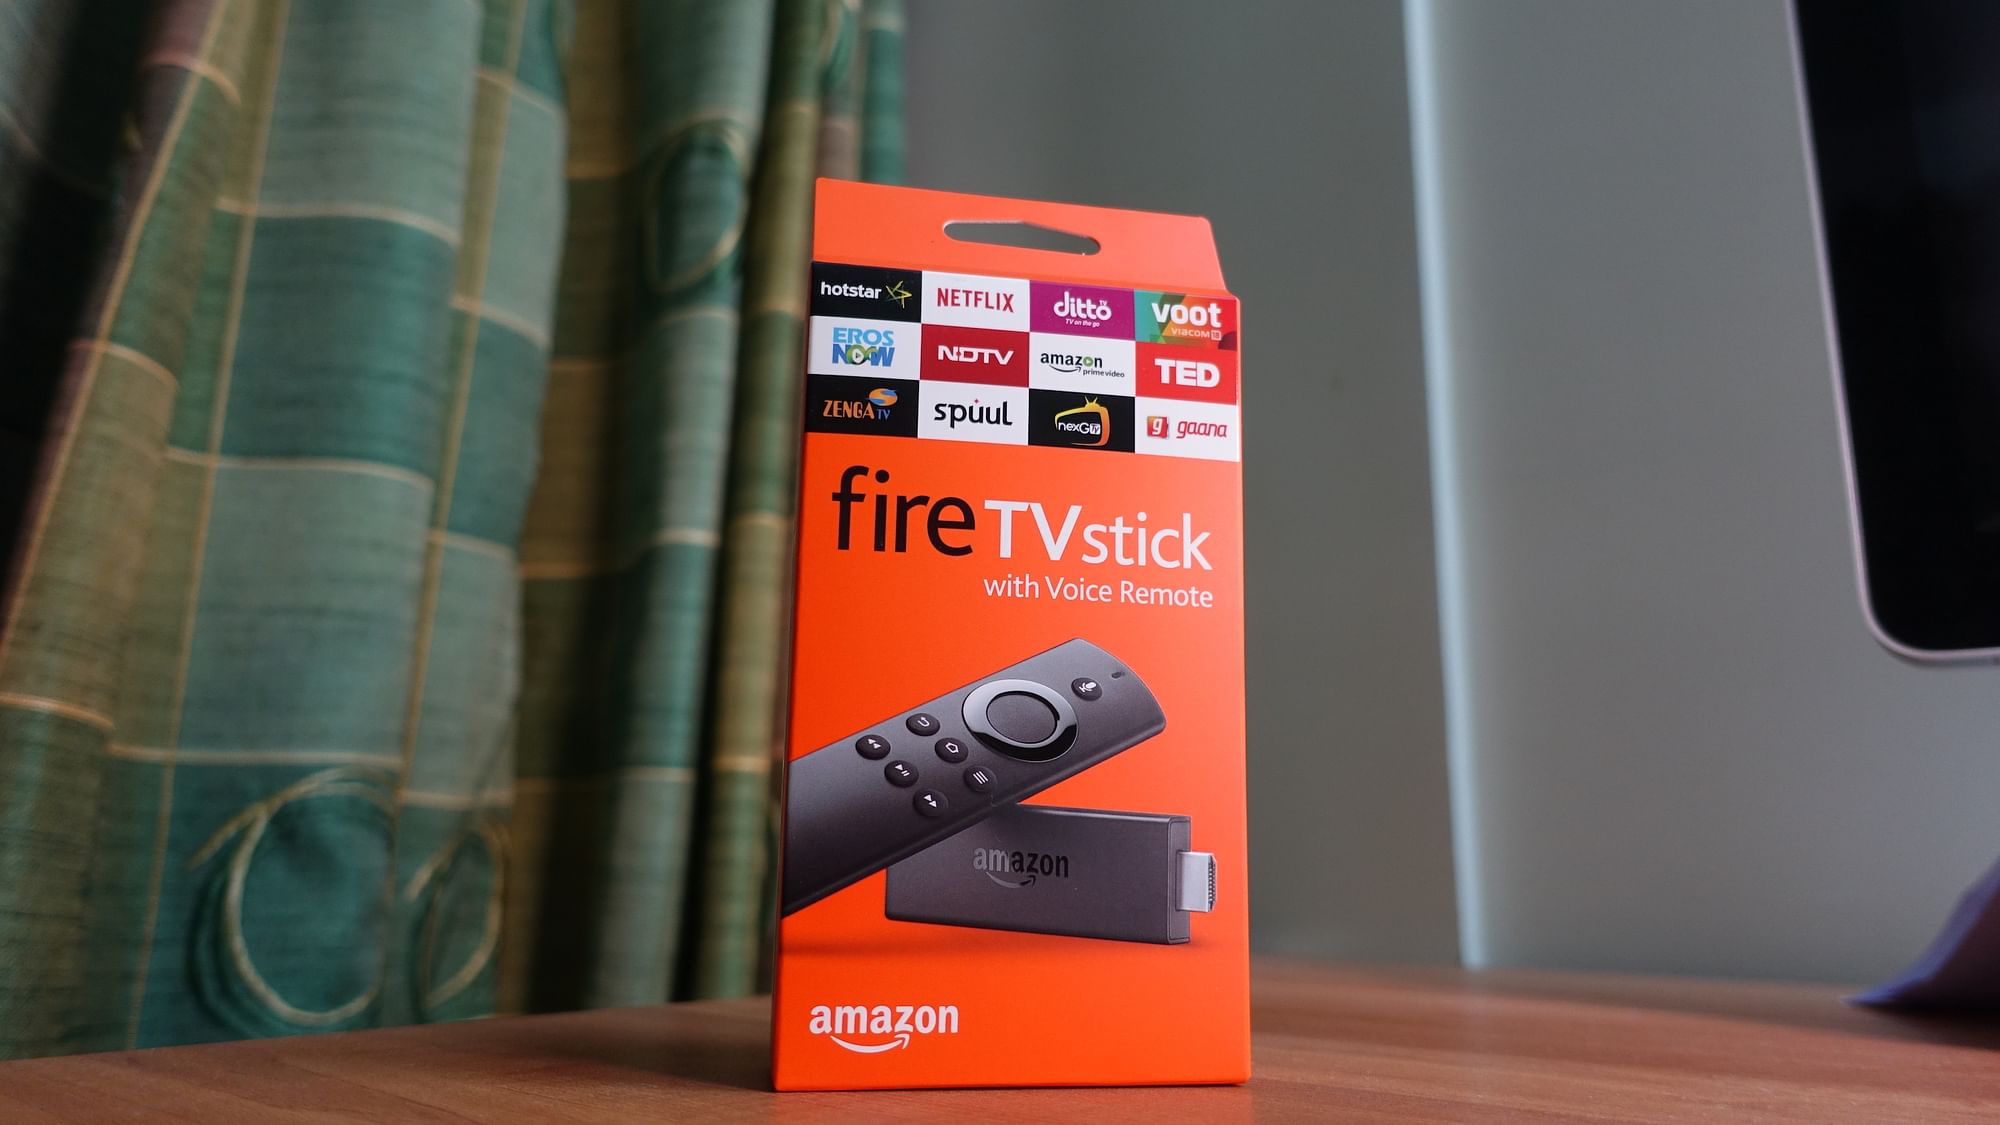 Picture of Amazon Fire TV stick for reference.